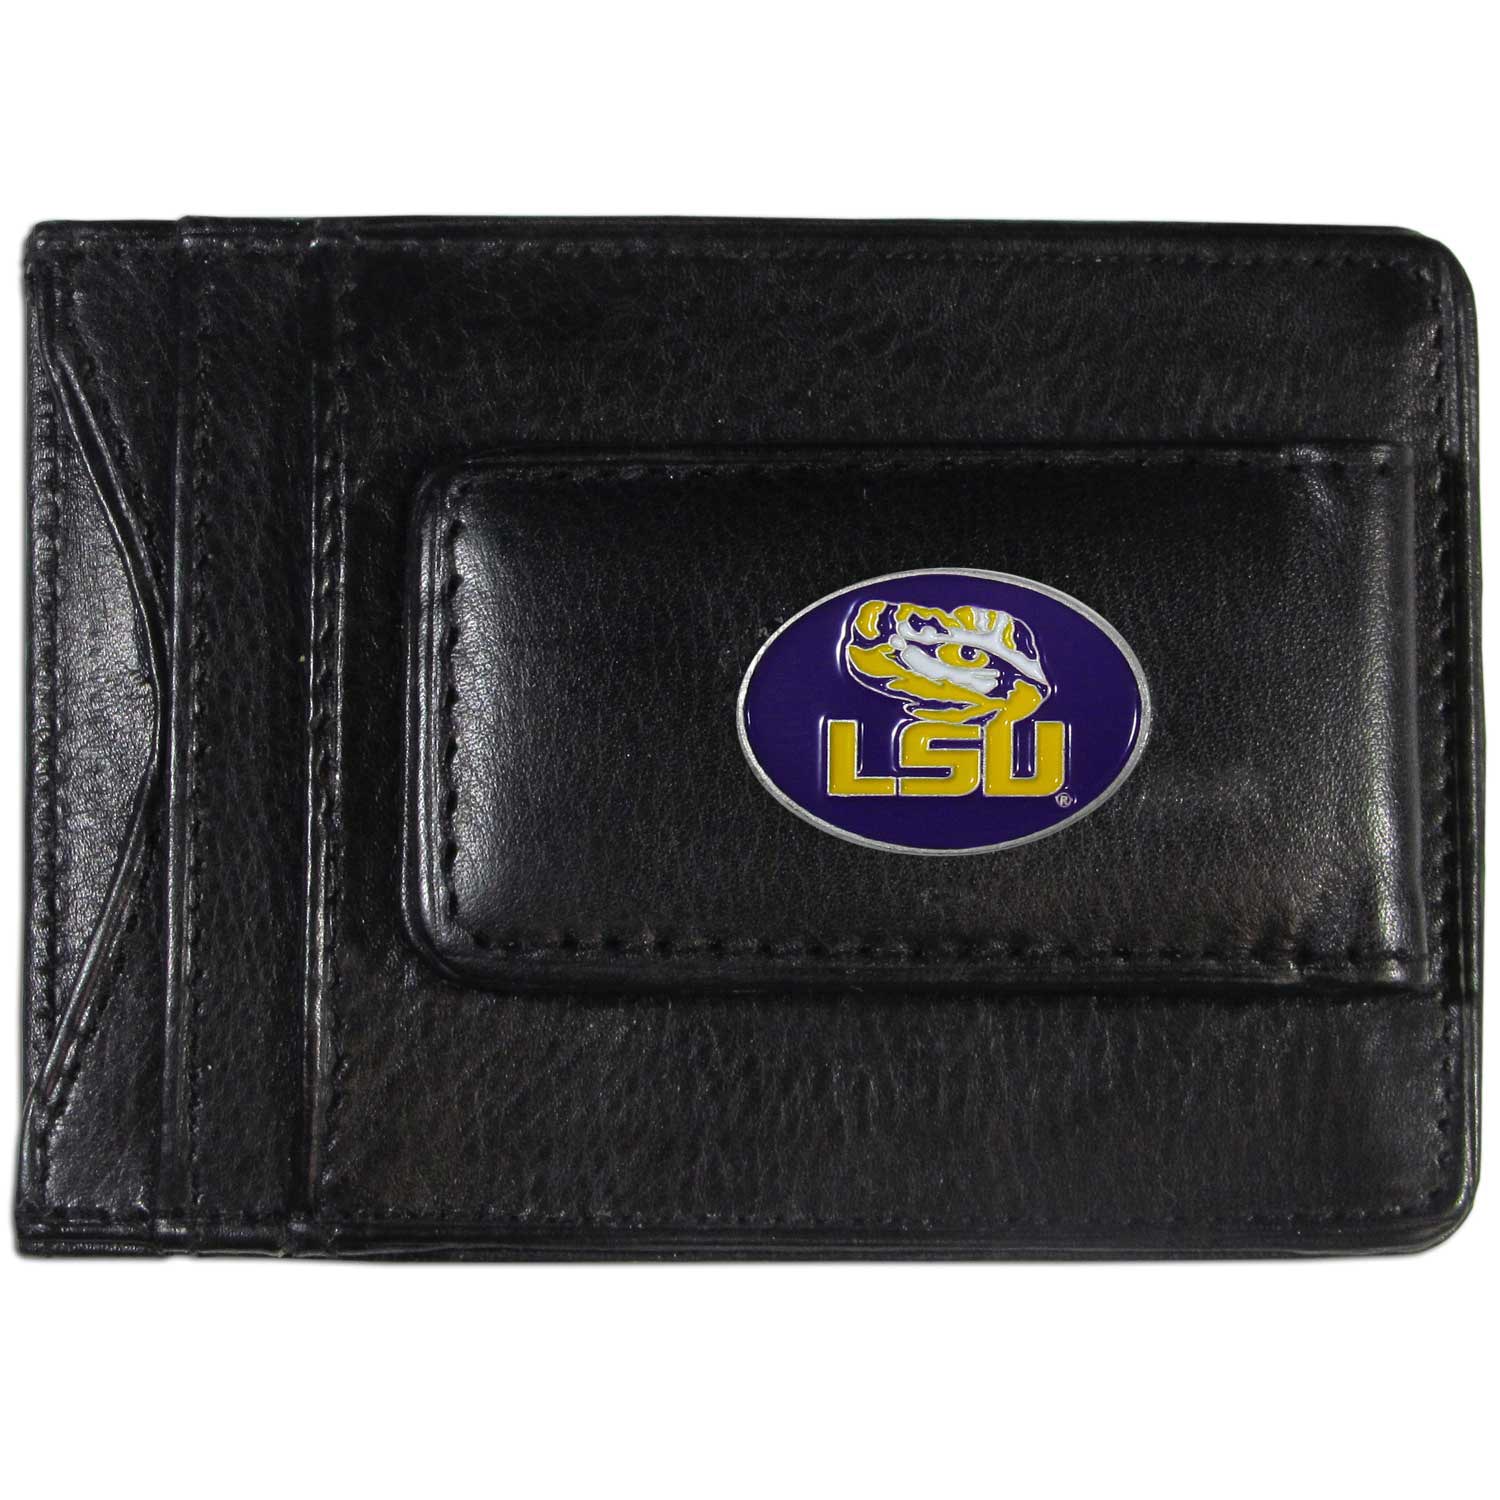 Ncaa -  Money Clip And Cardholder, Louis - image 2 of 4